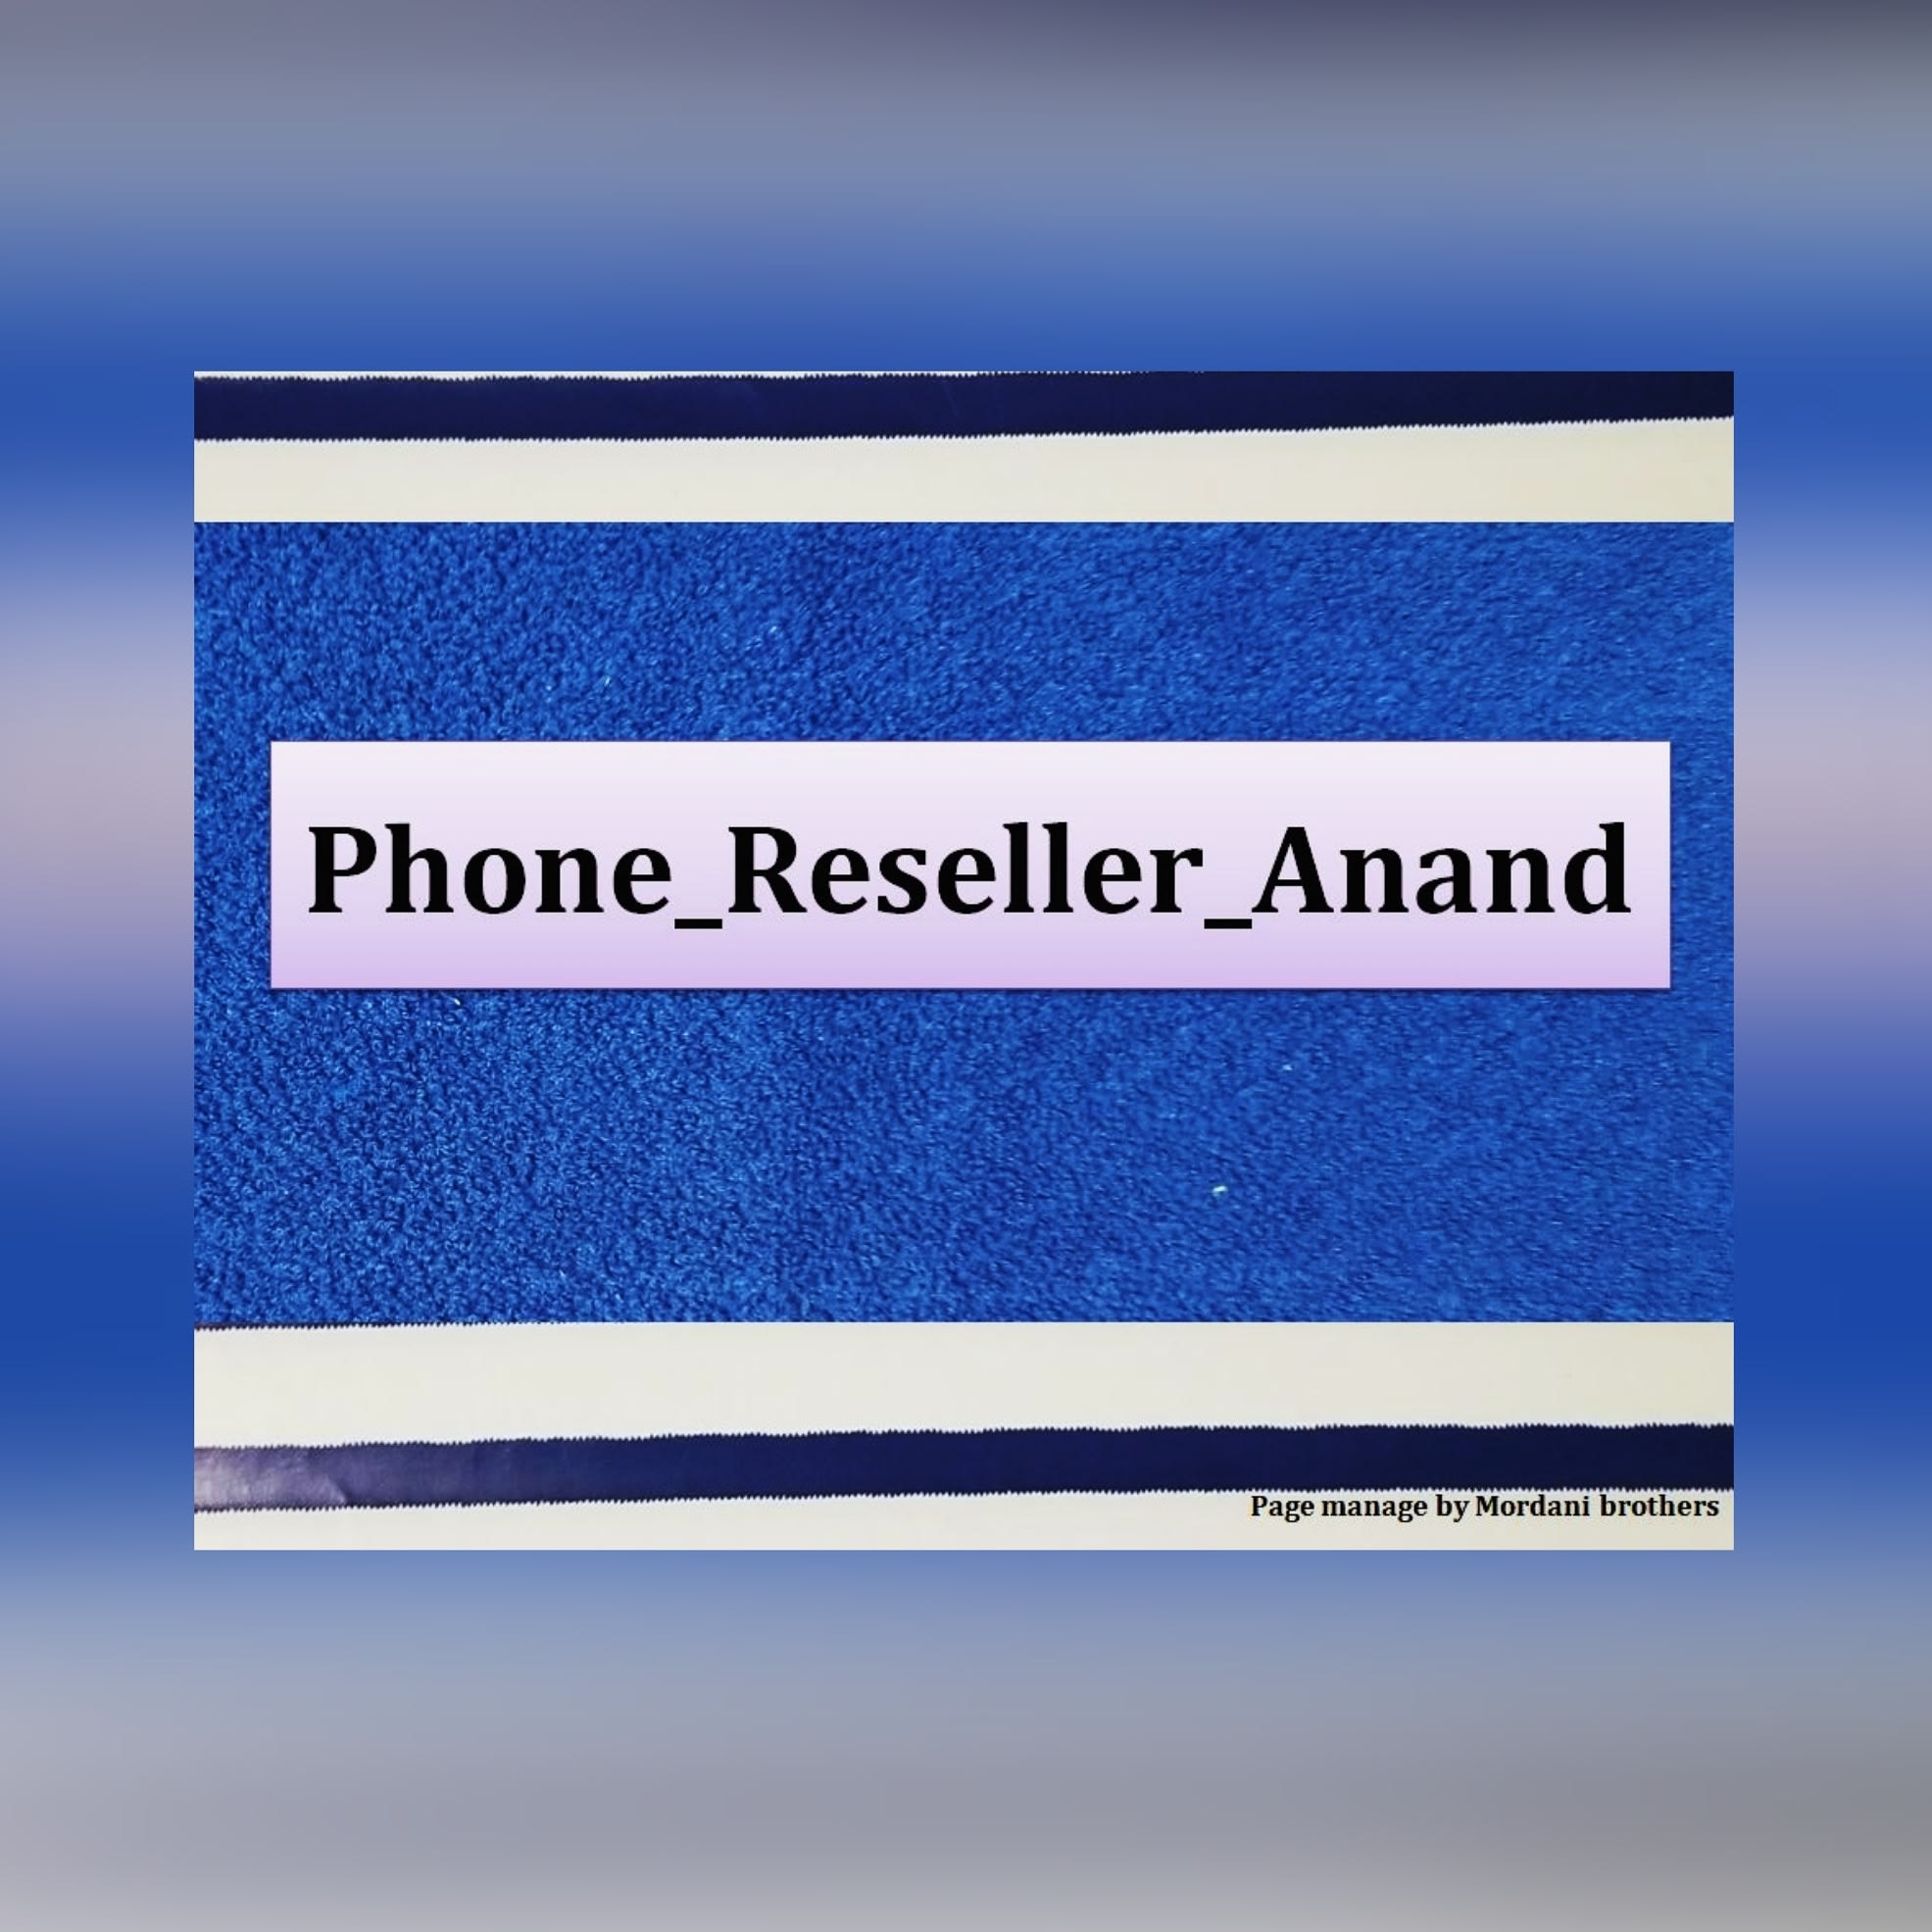 Phone Reseller Anand